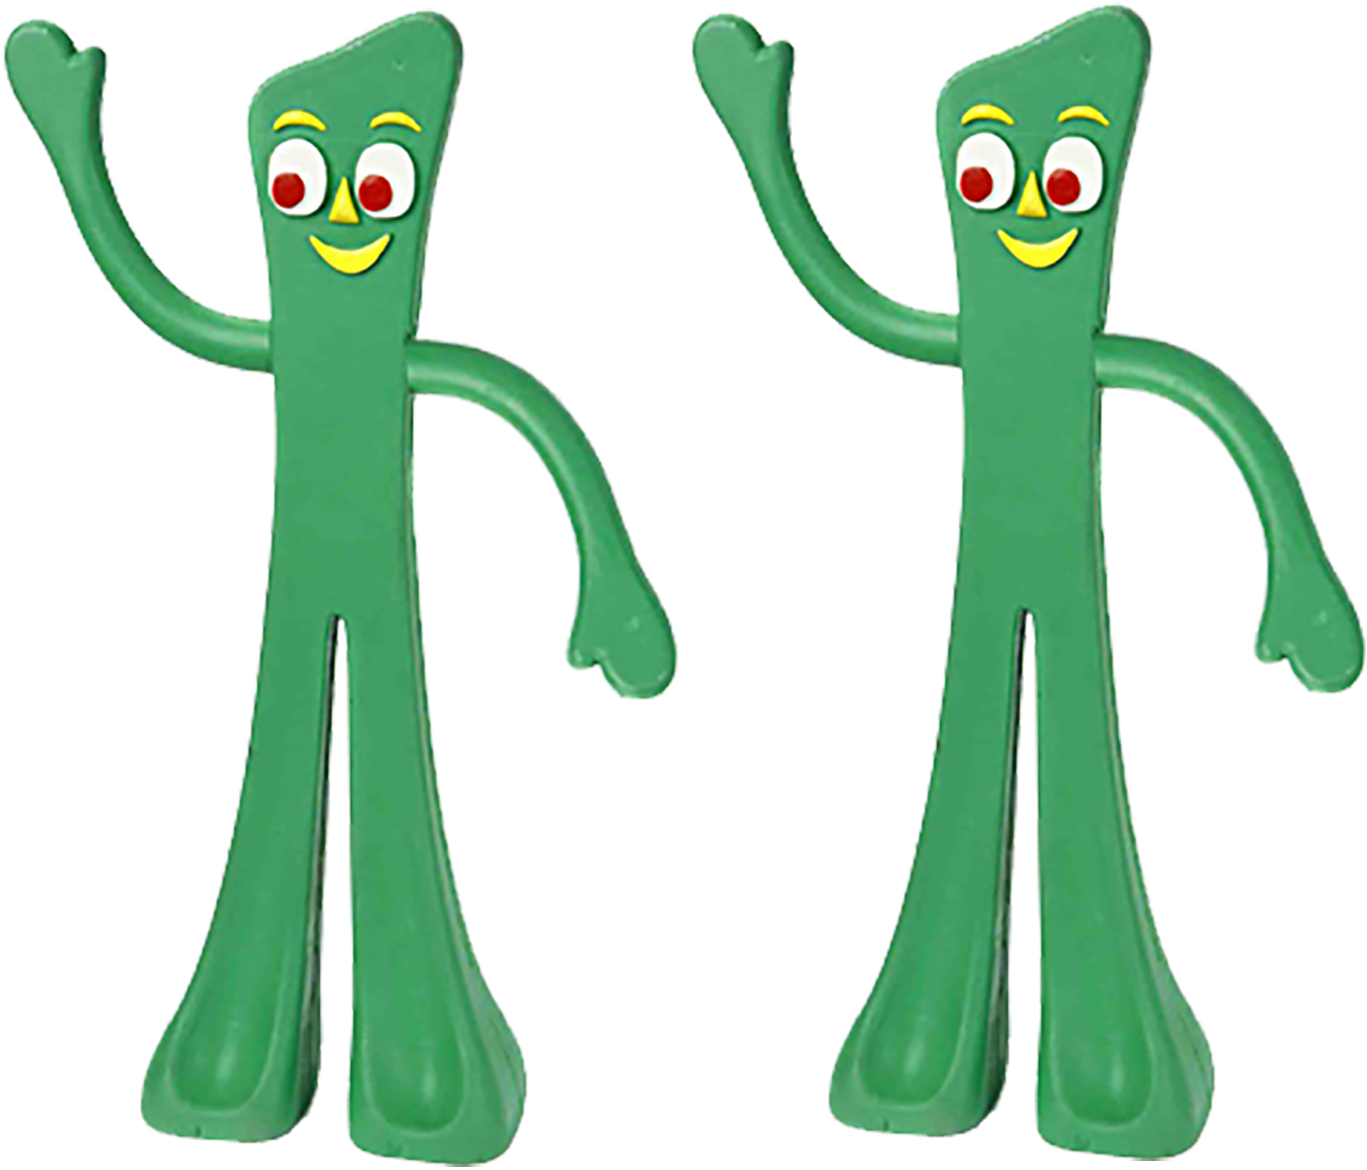 Gumby Claymation Character Pose PNG